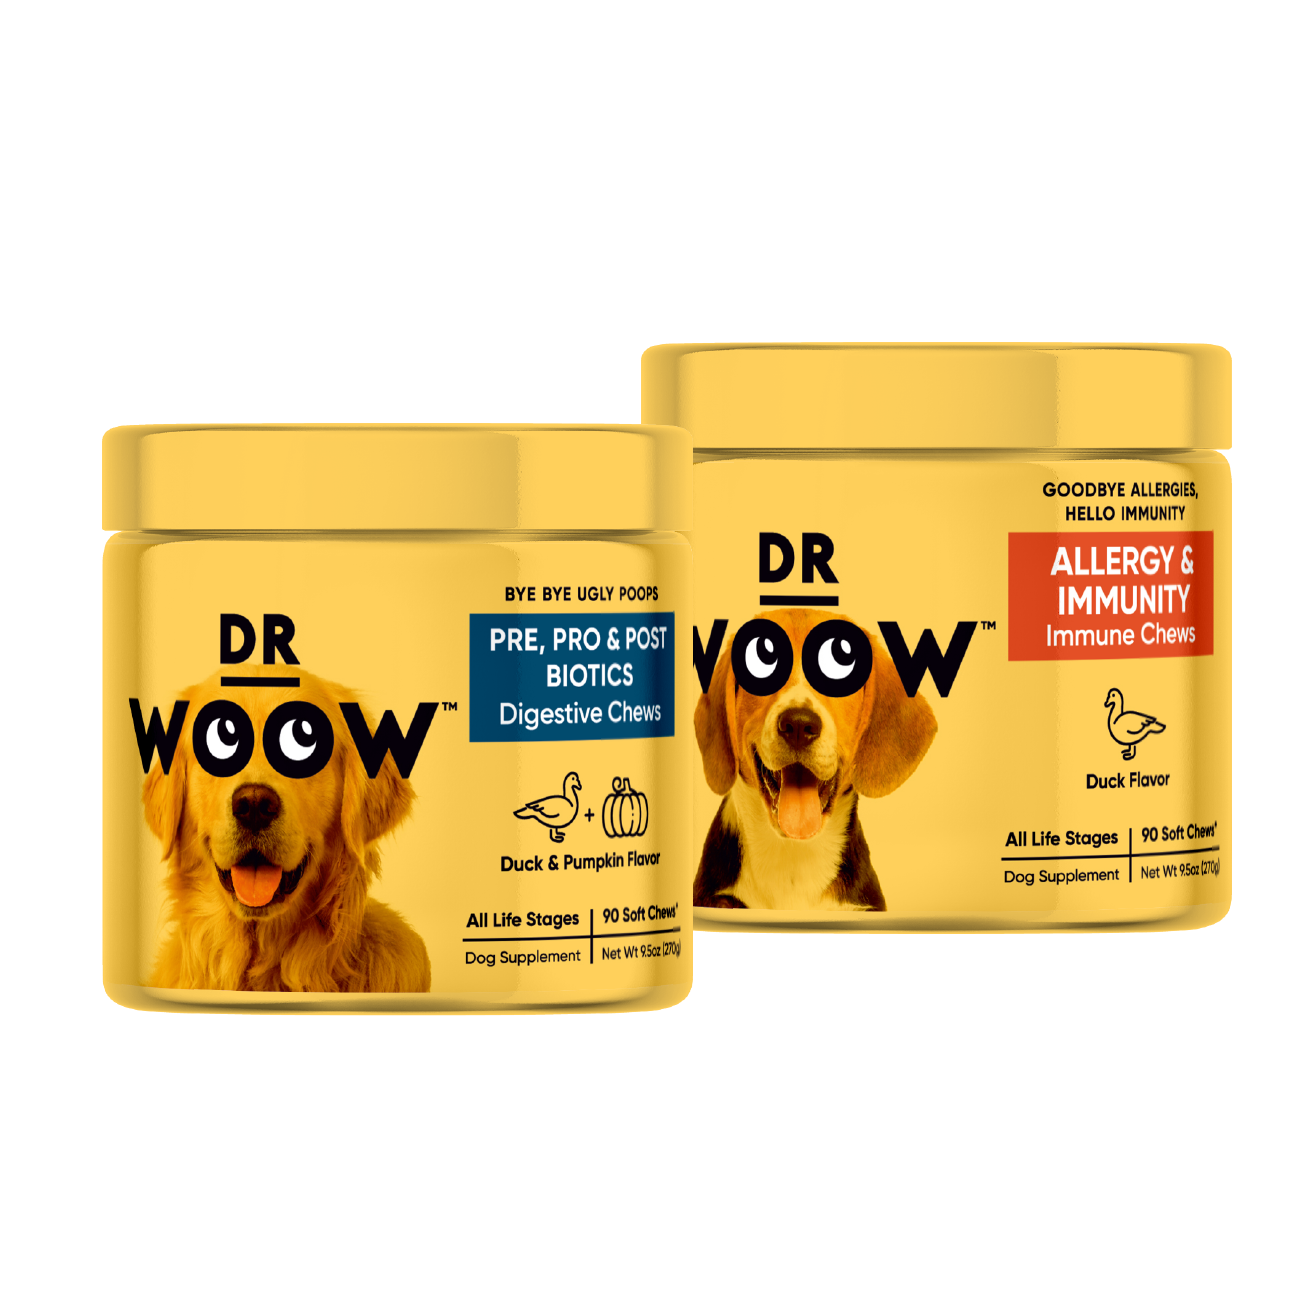 Dr Woow Dog Supplement Best seller Bundle Pre, Pro, Post Biotic and Allergy & Immunity